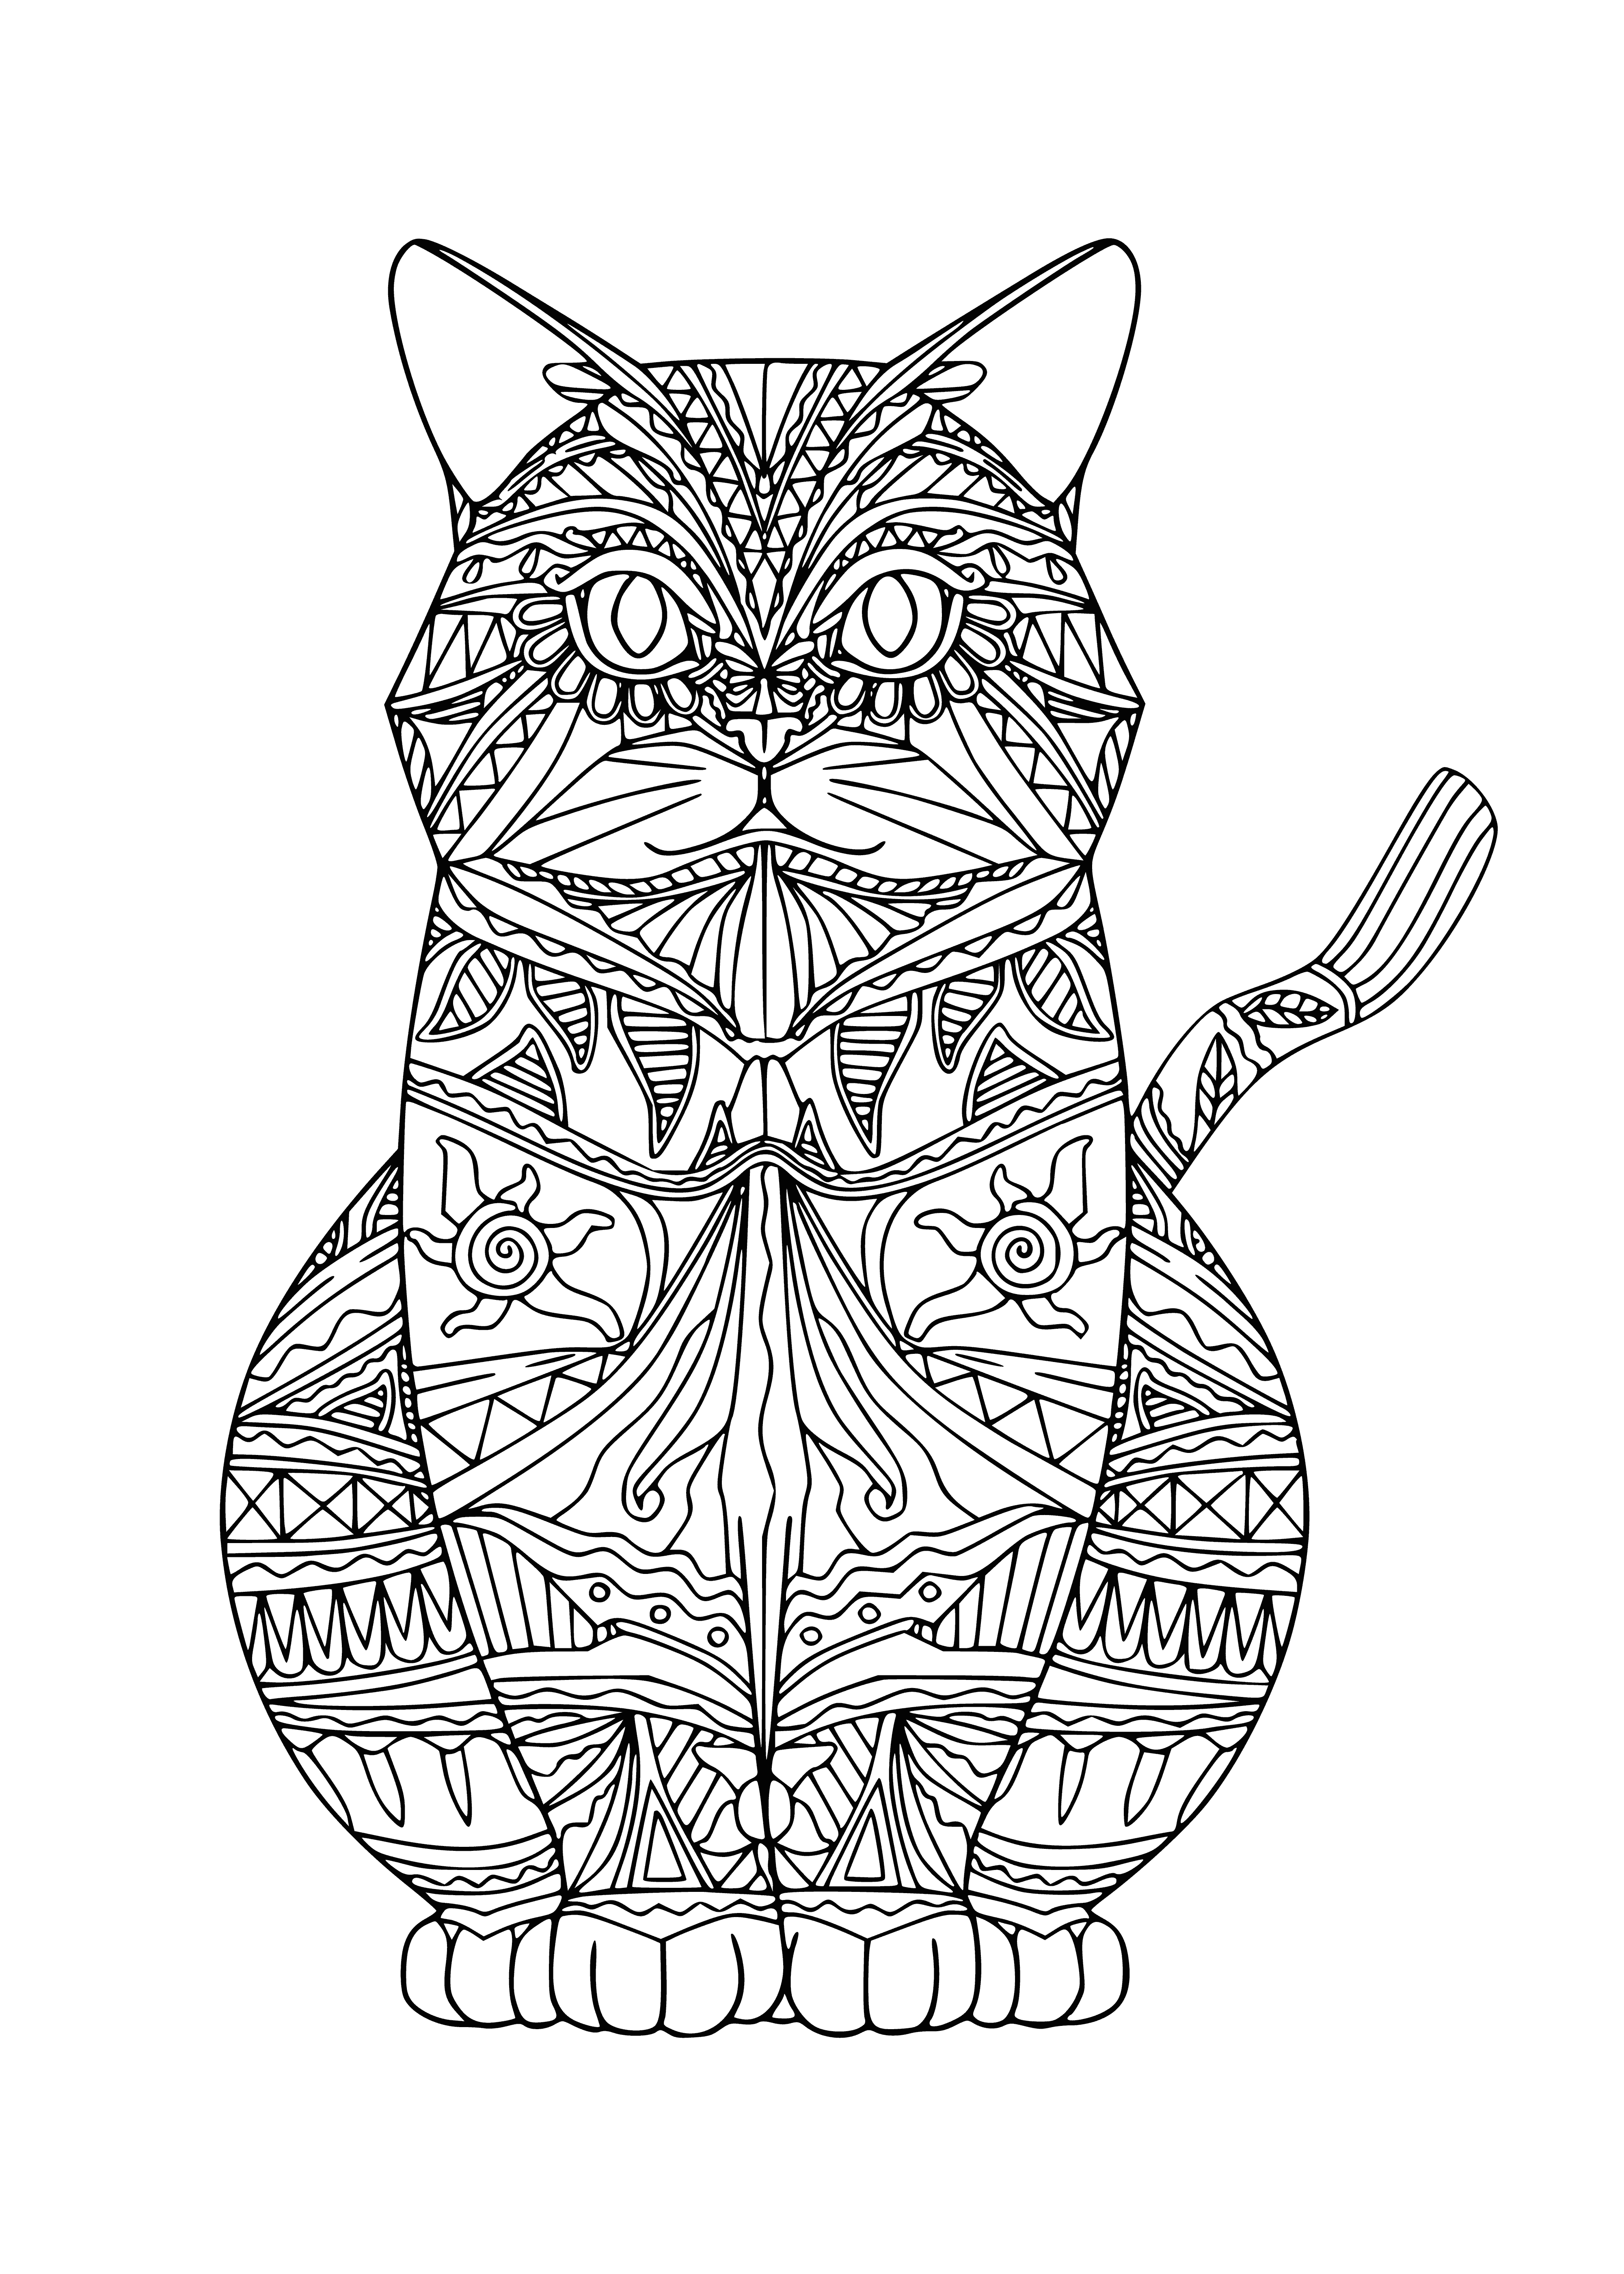 Kitty coloring page